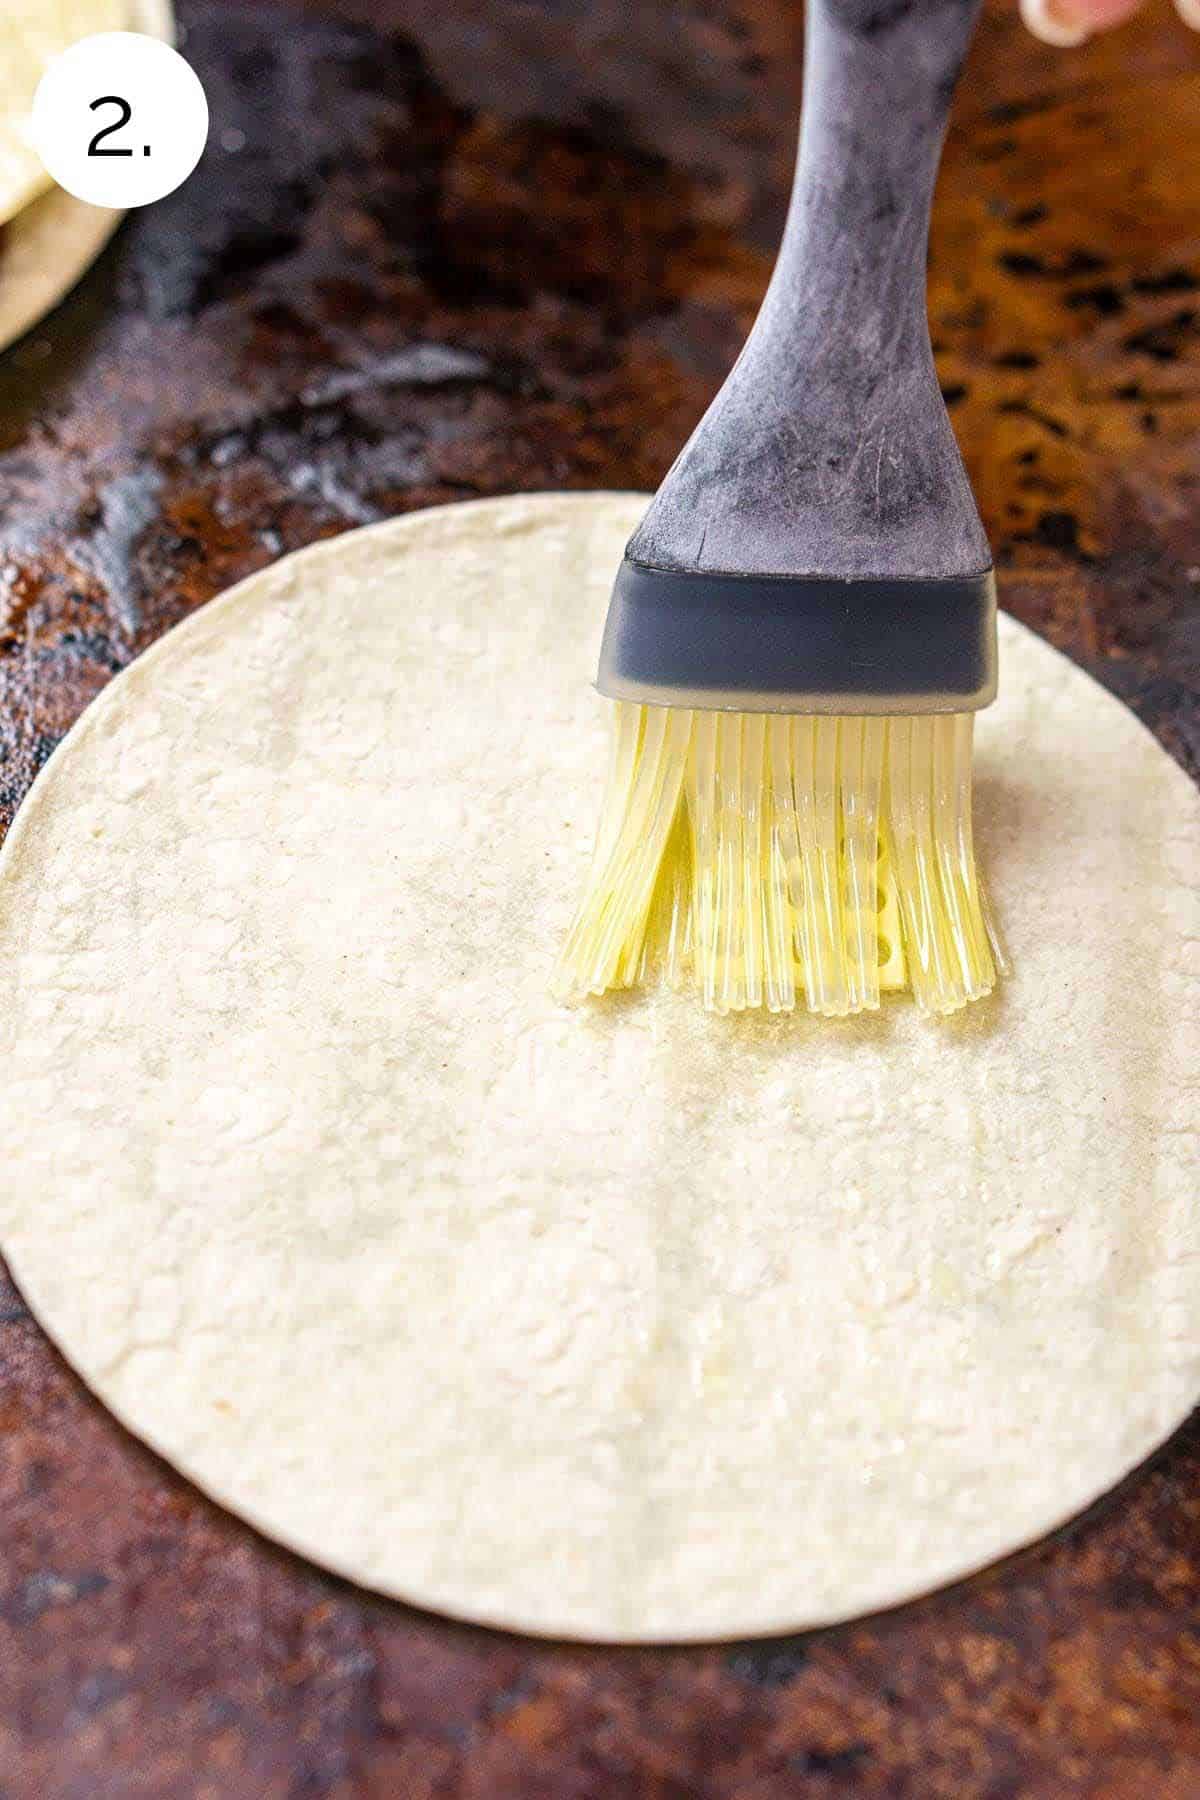 Using a pastry brush to coat the corn tortillas with a layer of olive oil.